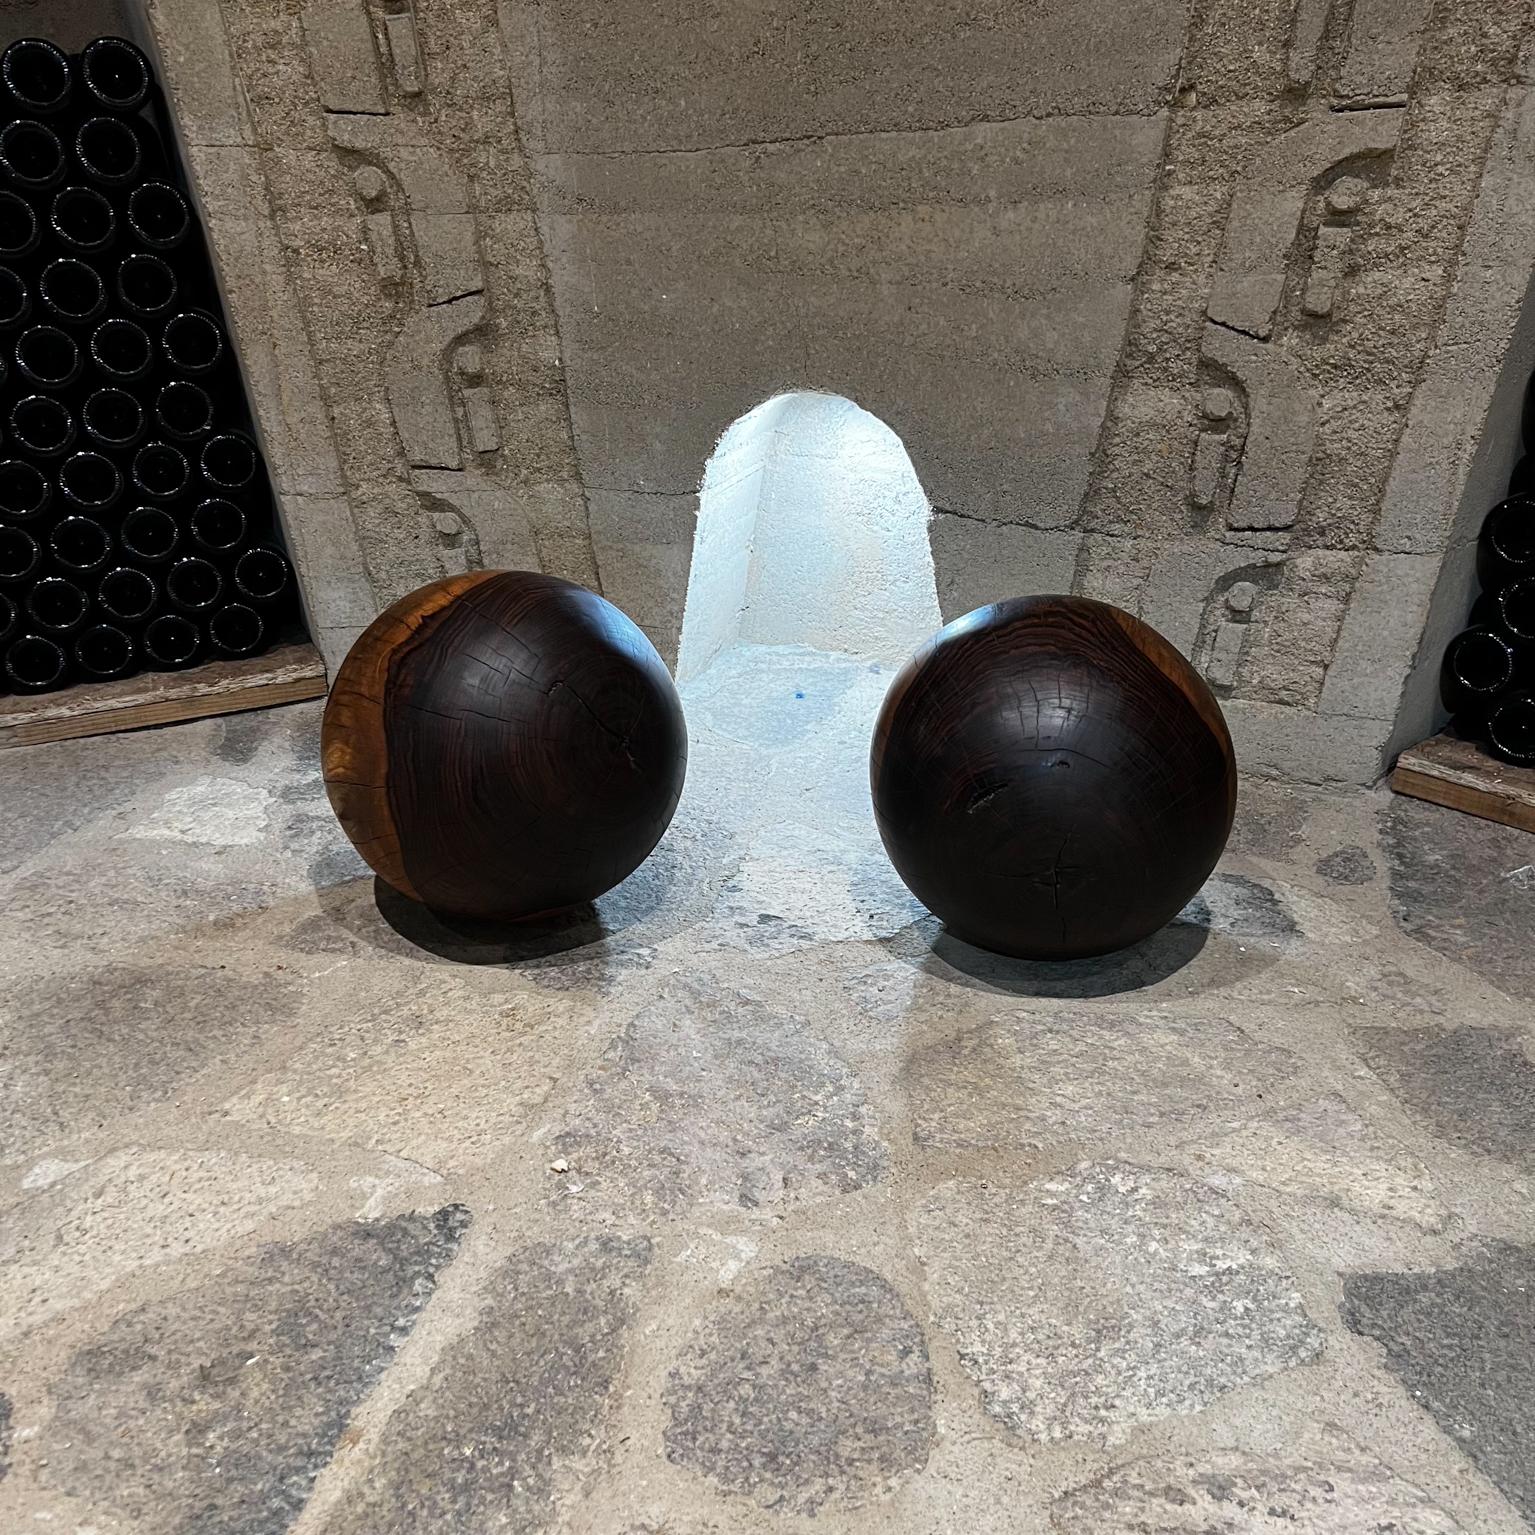 Two Sculptural Modern Art Spheres Exotic Bocote Wood Balls from Mexico
Exquisitely textured wood grain.
Size: 11.5 tall x 12 approximately variation to 11.5 to 13
Original vintage unrestored condition.
Refer to images listed.